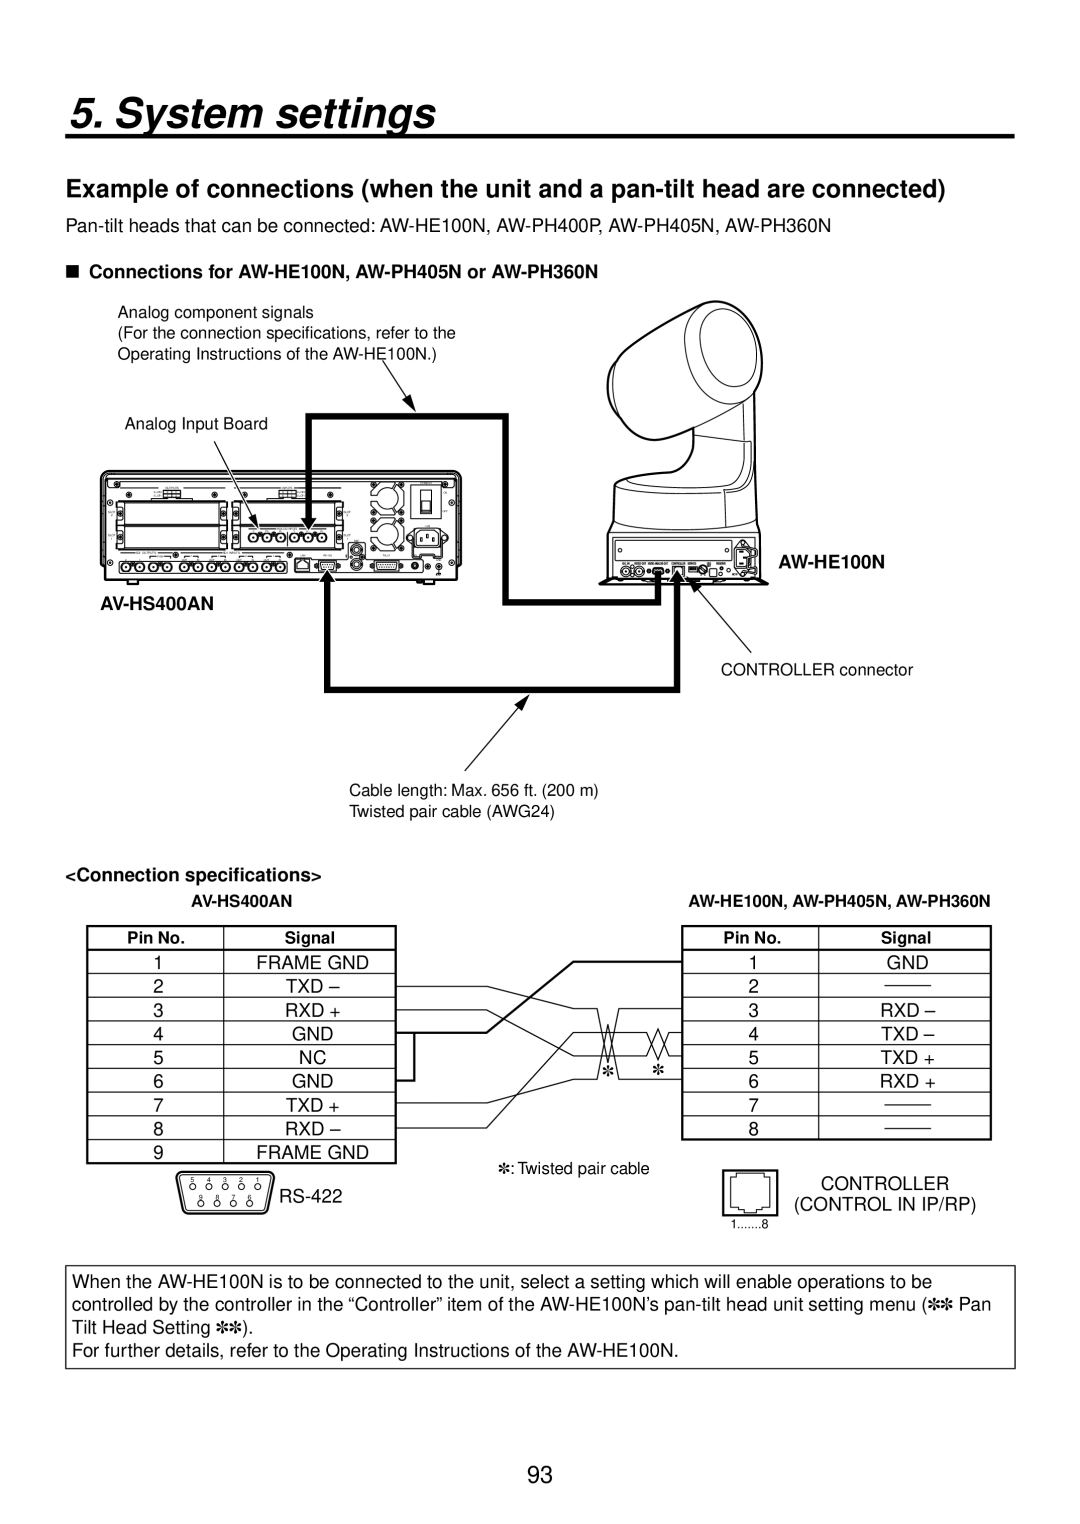 Panasonic AV-HS400AN manual System settings,  Connections for AW-HE100N, AW-PH405N or AW-PH360N, Connection specifications 